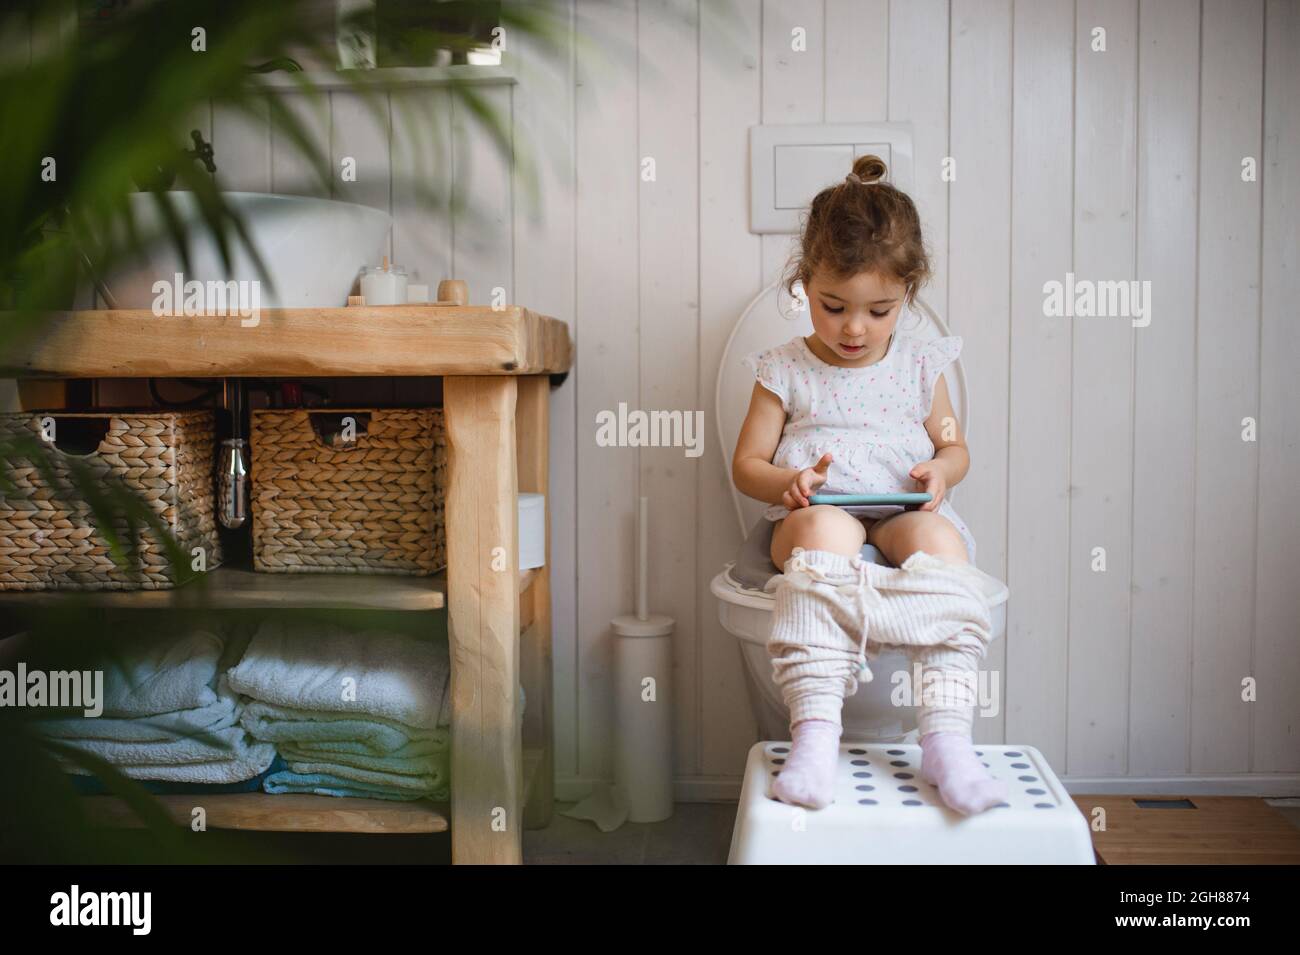 Portrait of cute small sitting on toilet indoor at Home, using Smartphone. Stockfoto